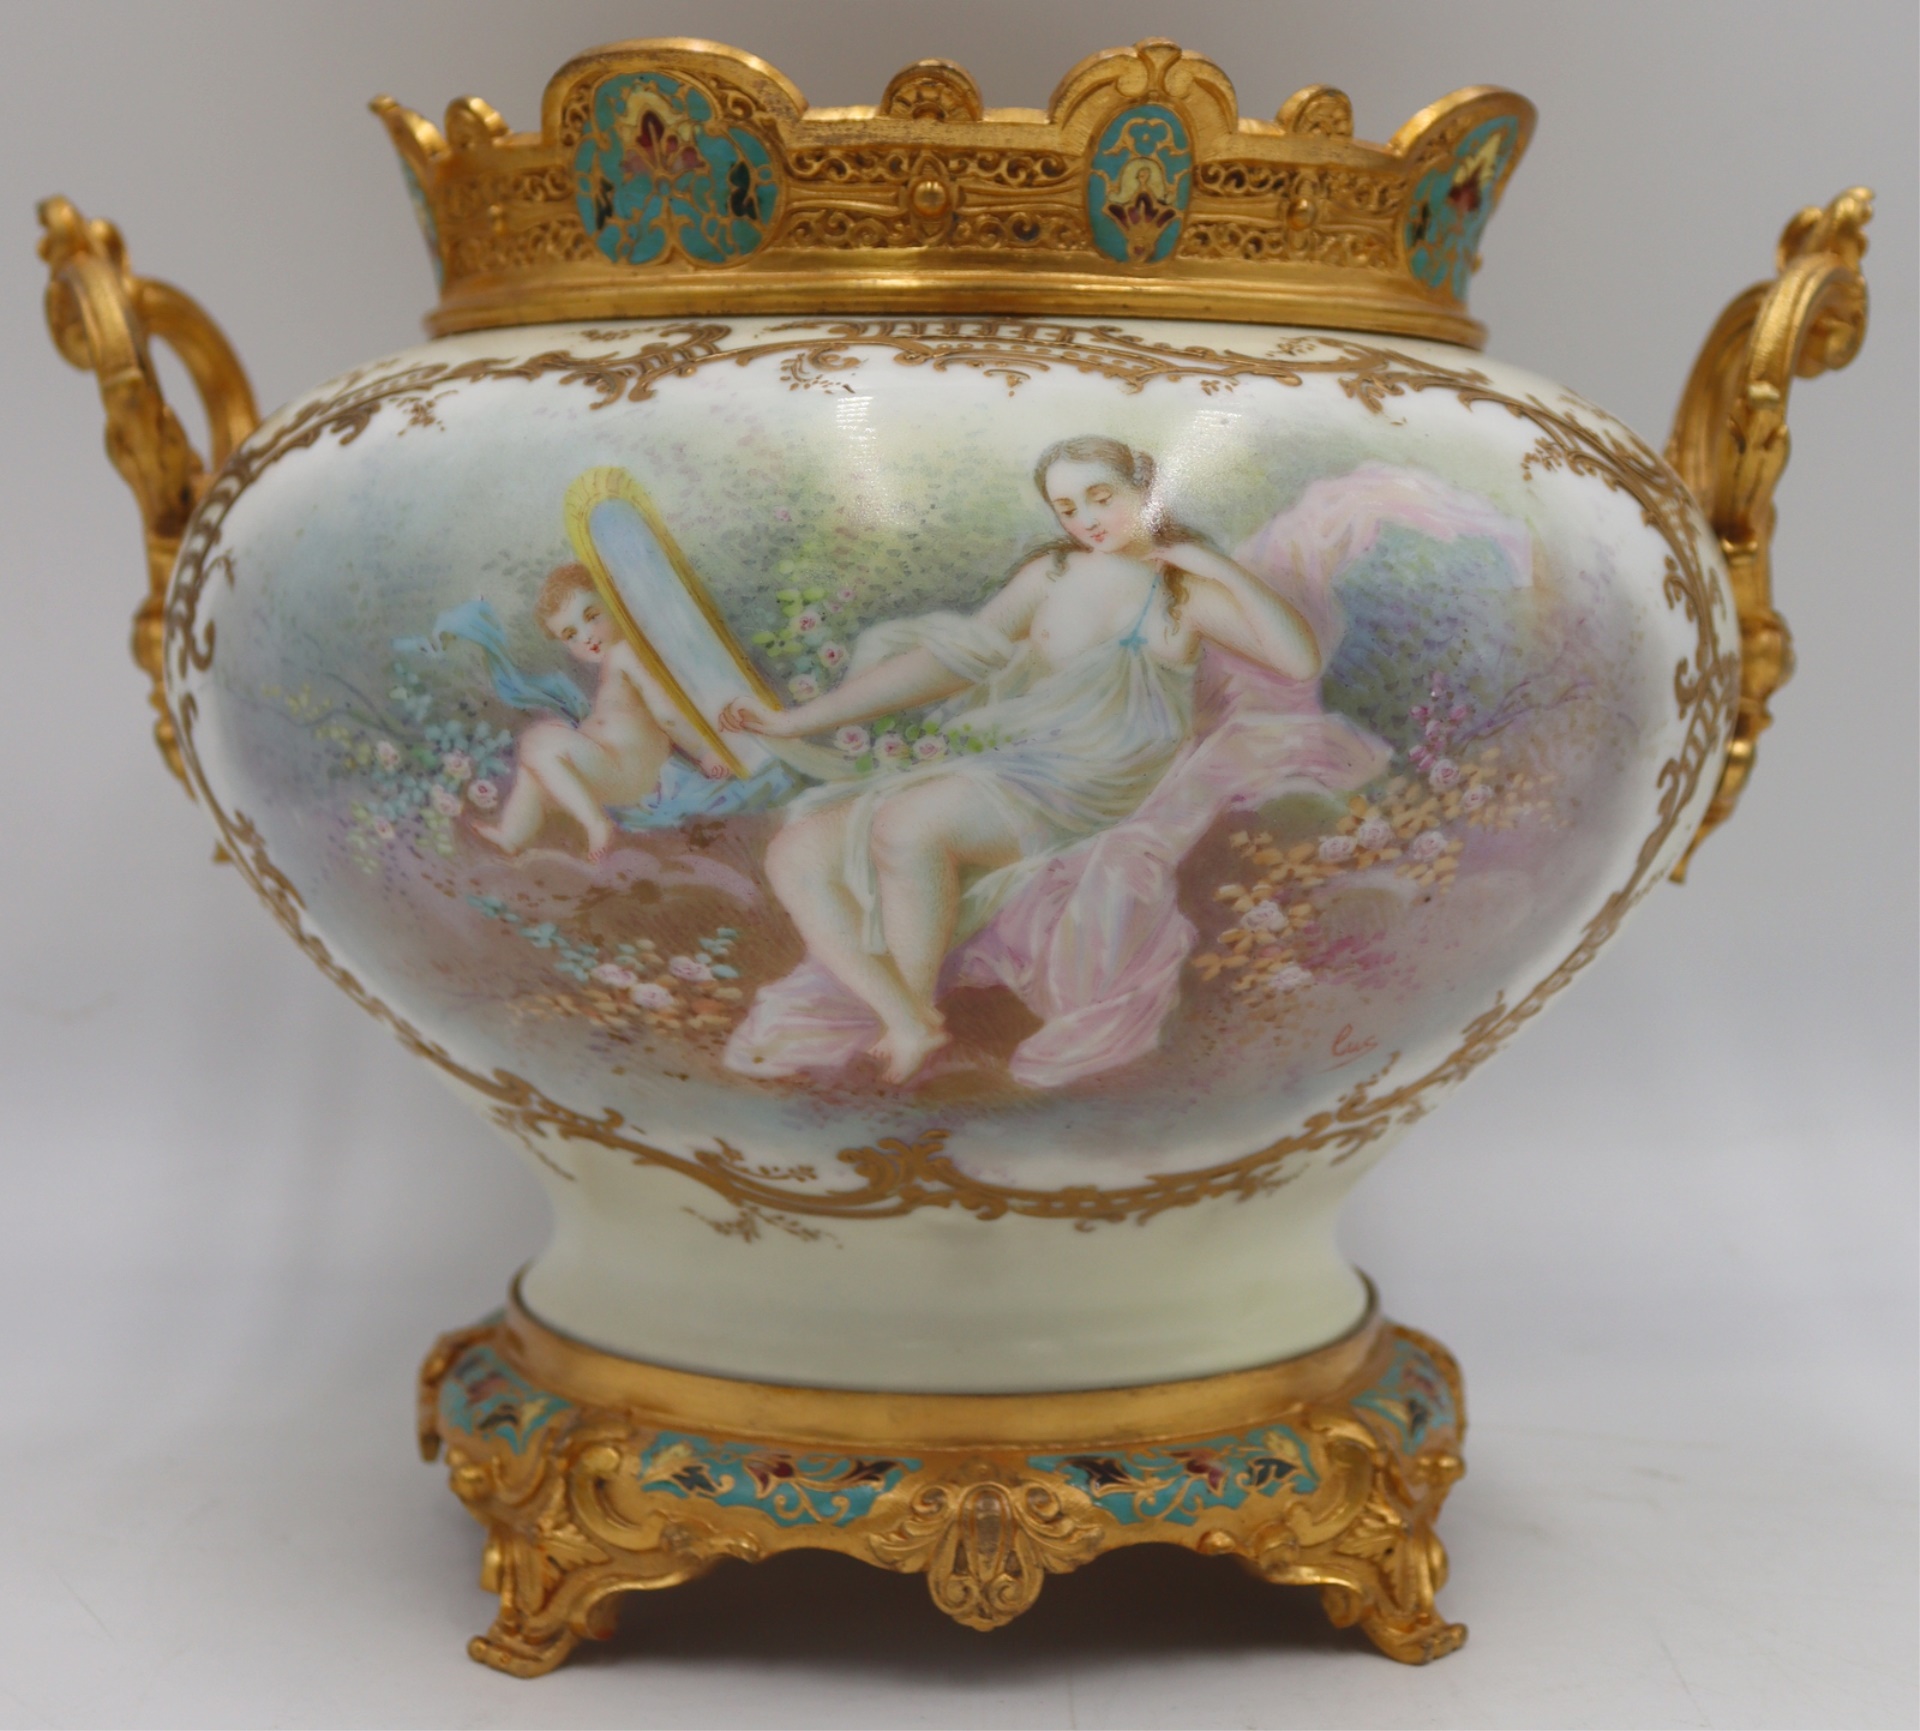 SIGNED PAINTED PORCELAIN AND CHAMPLEVE